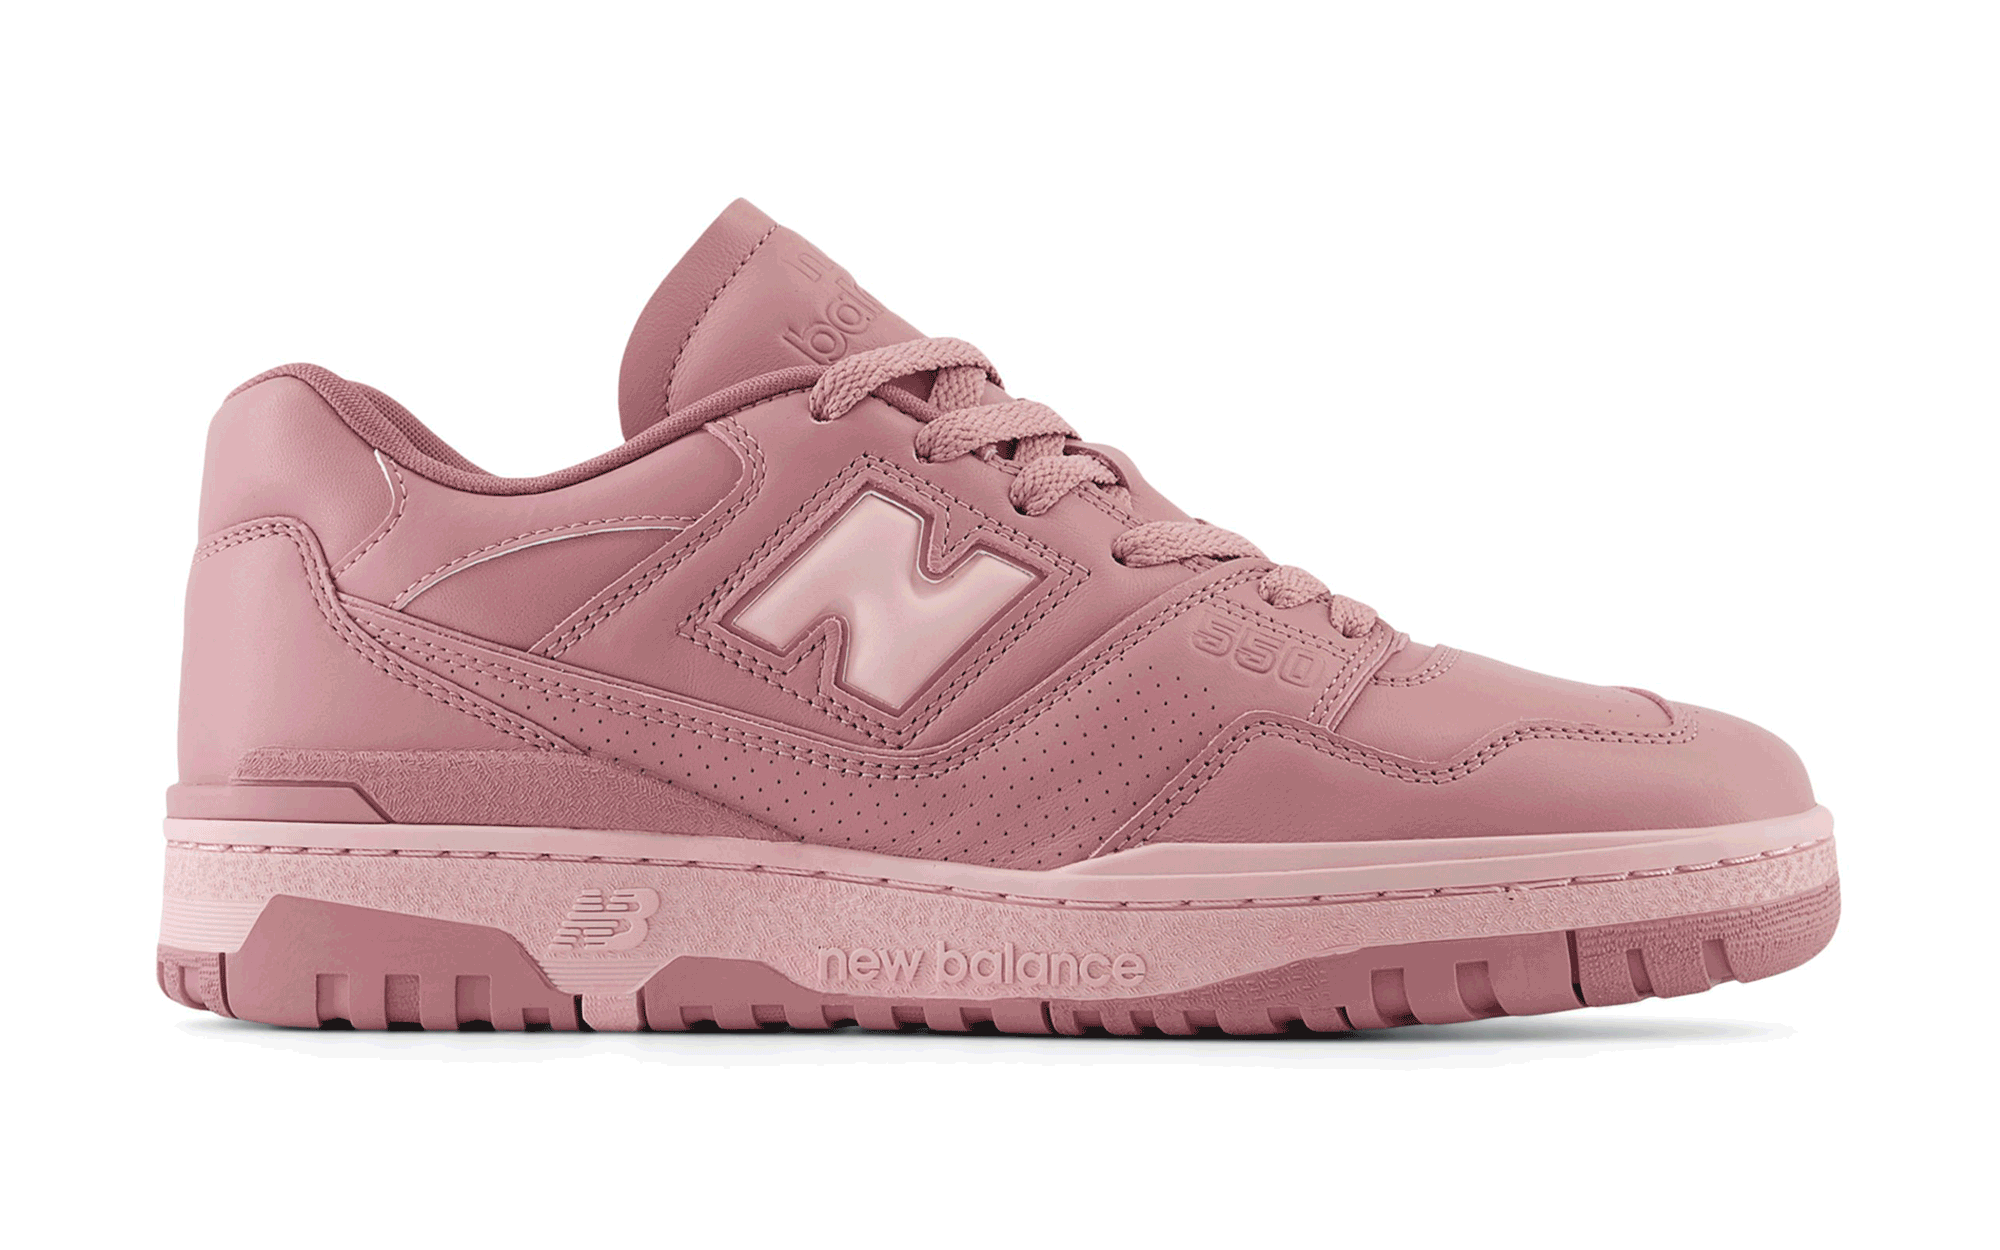 New Balance to Release 550 "Monochromatic Pack" This Summer